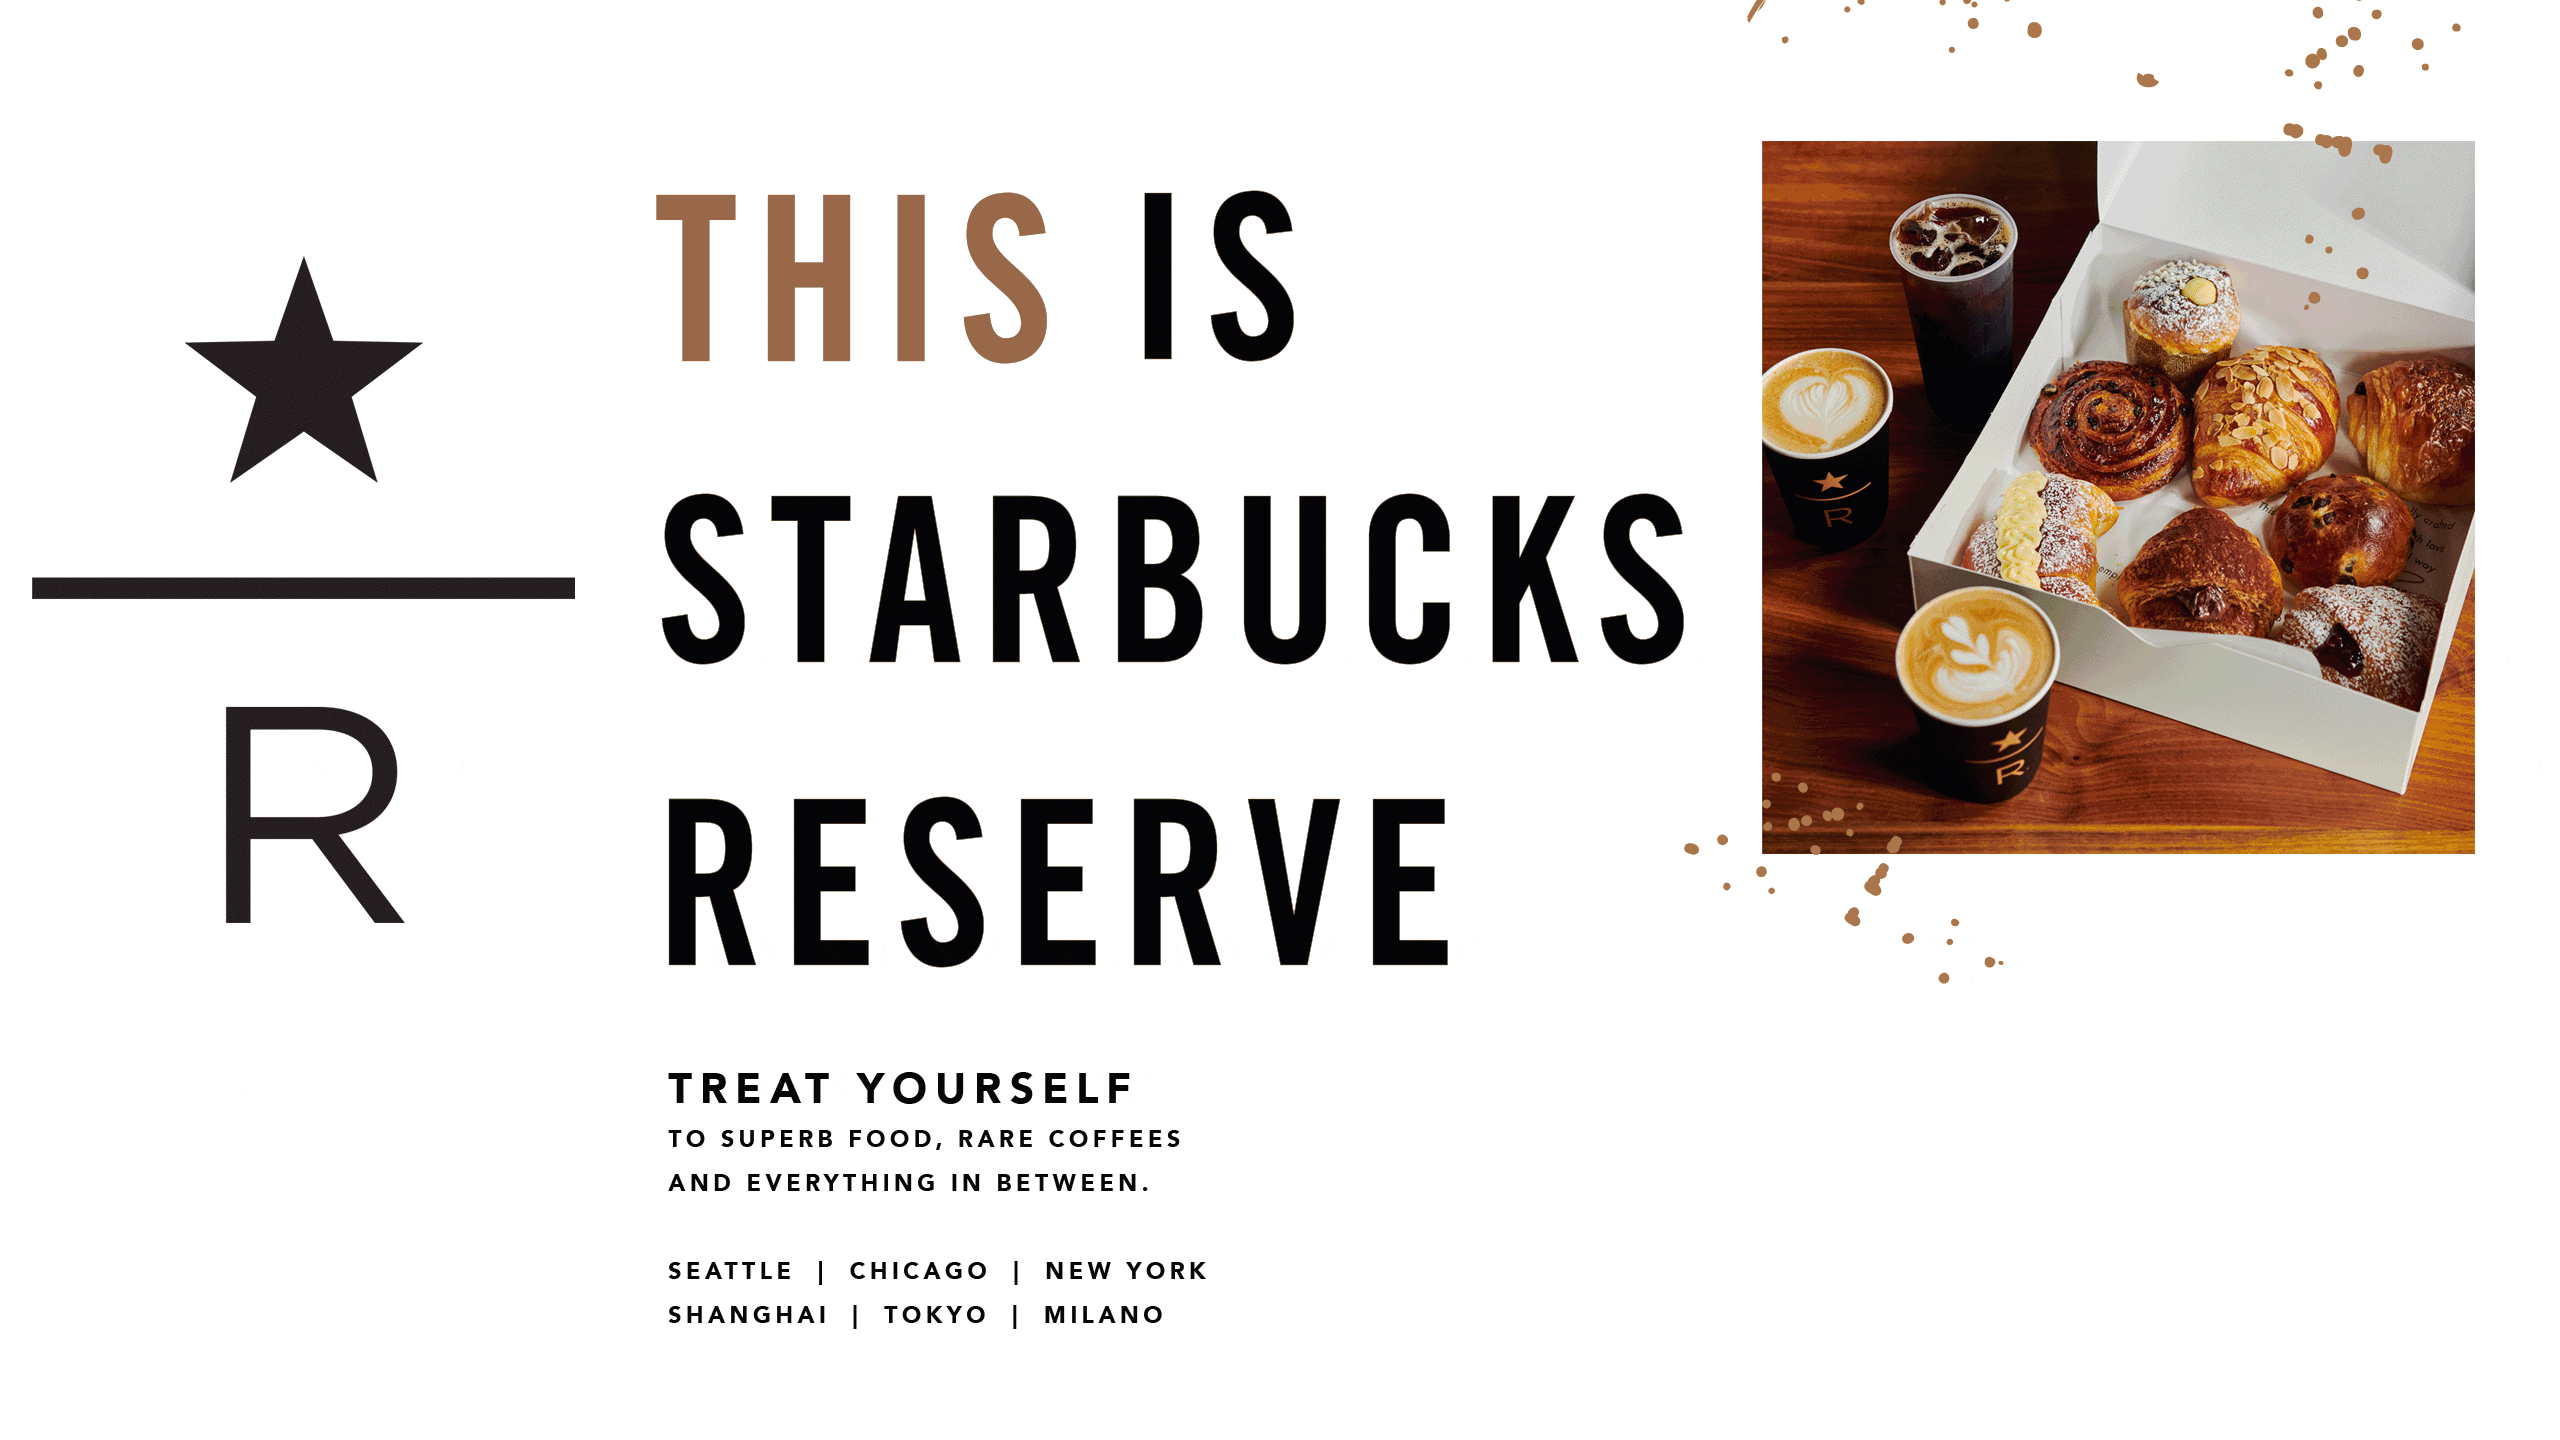 This Is Starbucks Reserve. Treat  yourself to superb food, rare coffees and everything in between. Seattle, Chicago, New York, Shanghai, Tokyo and Milano. Rotating images of coffee, pastries, sandwiches, salad, pizza, dessert, wine, cocktails, tote bag, tumbler and scarf.